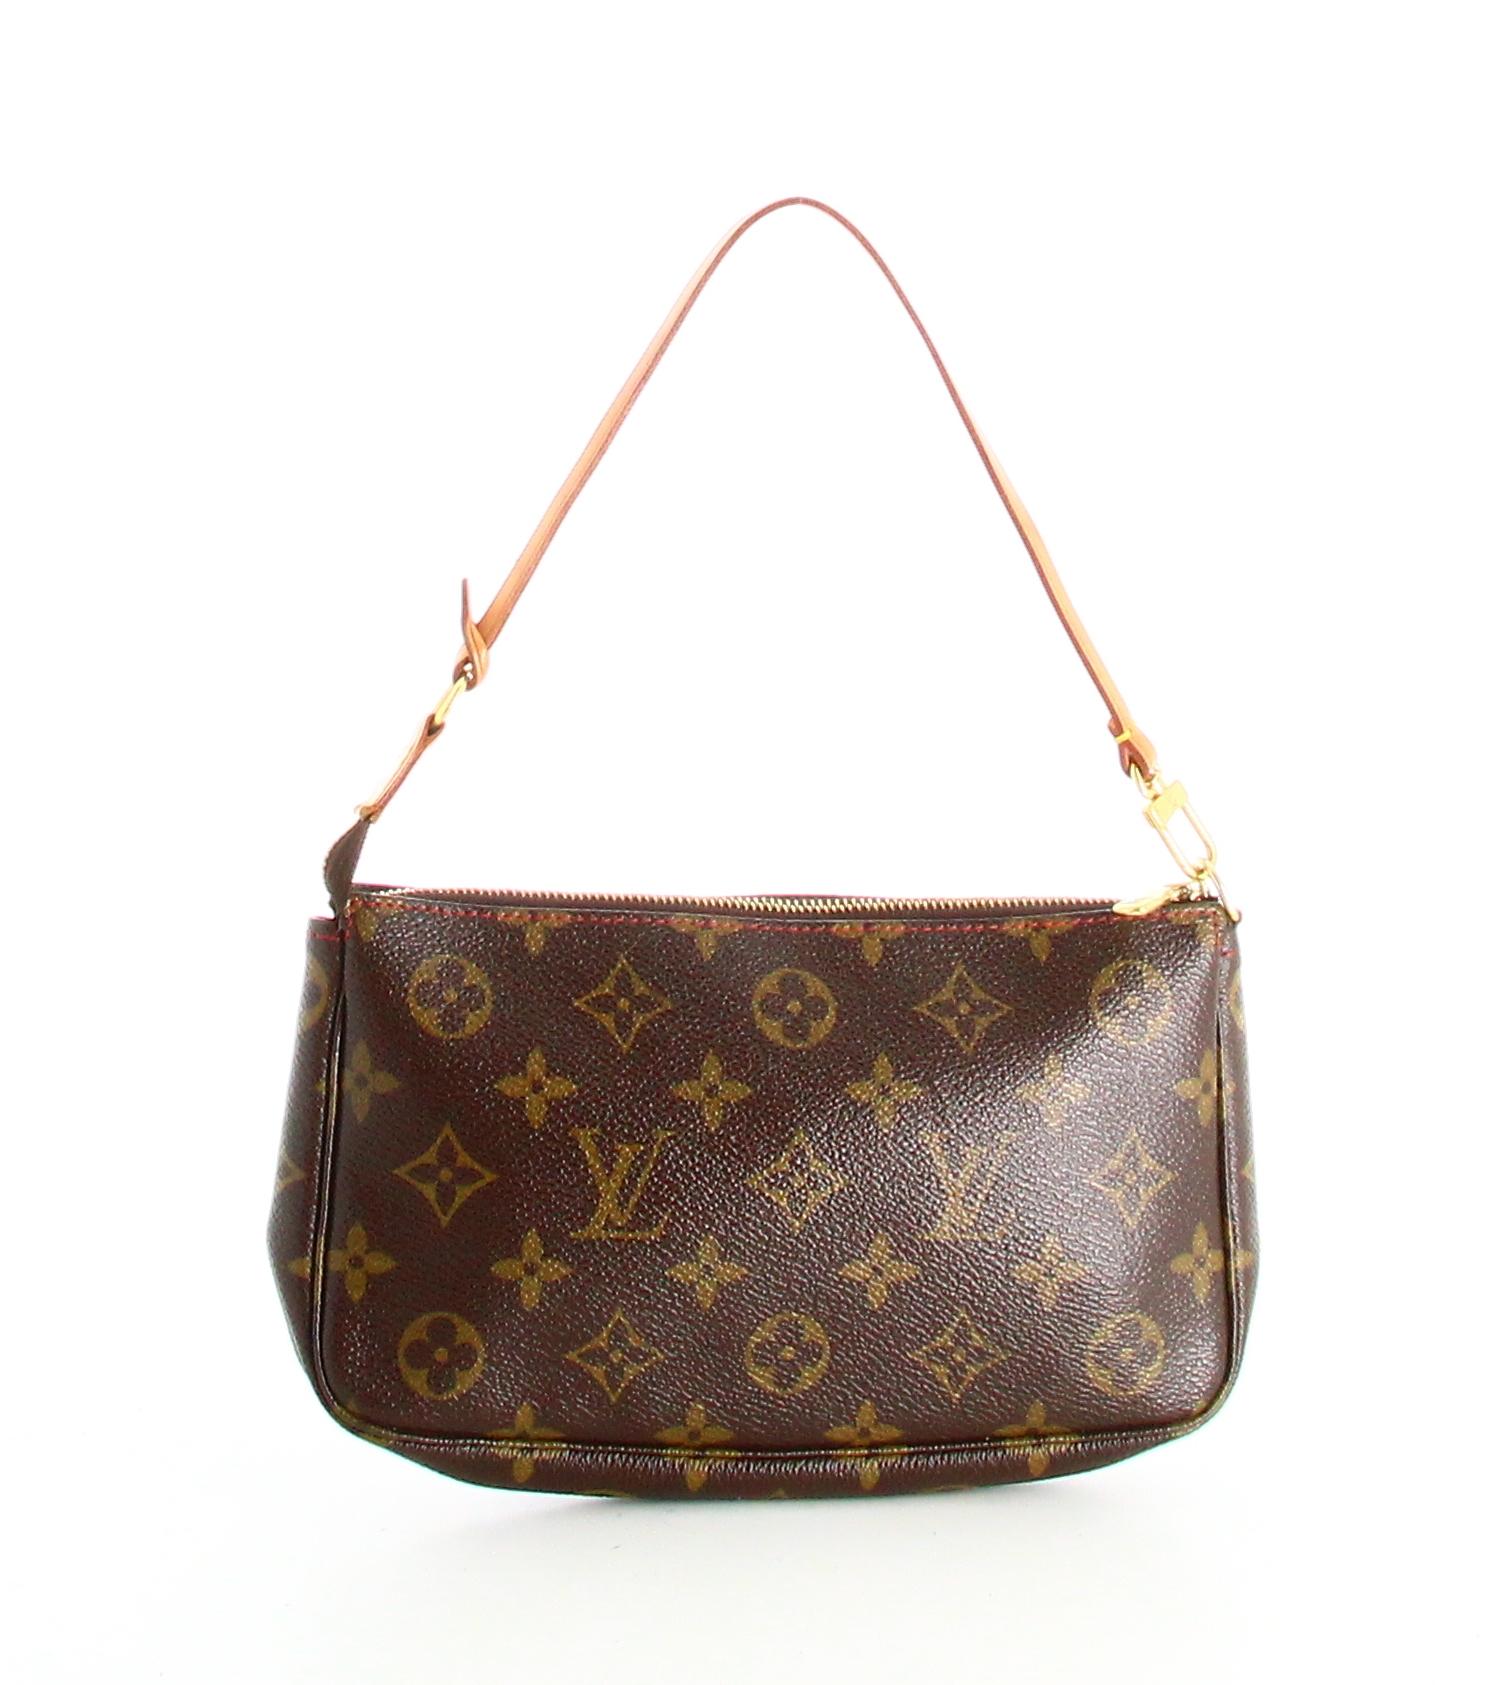 2005 Louis Vuitton Mini Handbag Canvas Monogram Cherry 

- Very good condition. Shows very slight signs of wear over time.
- Louis Vuitton Mini Handbag 
- Monongram Canvas 
- Cherry on the side 
- Brown leather strap 
- Clasp: golden zip 